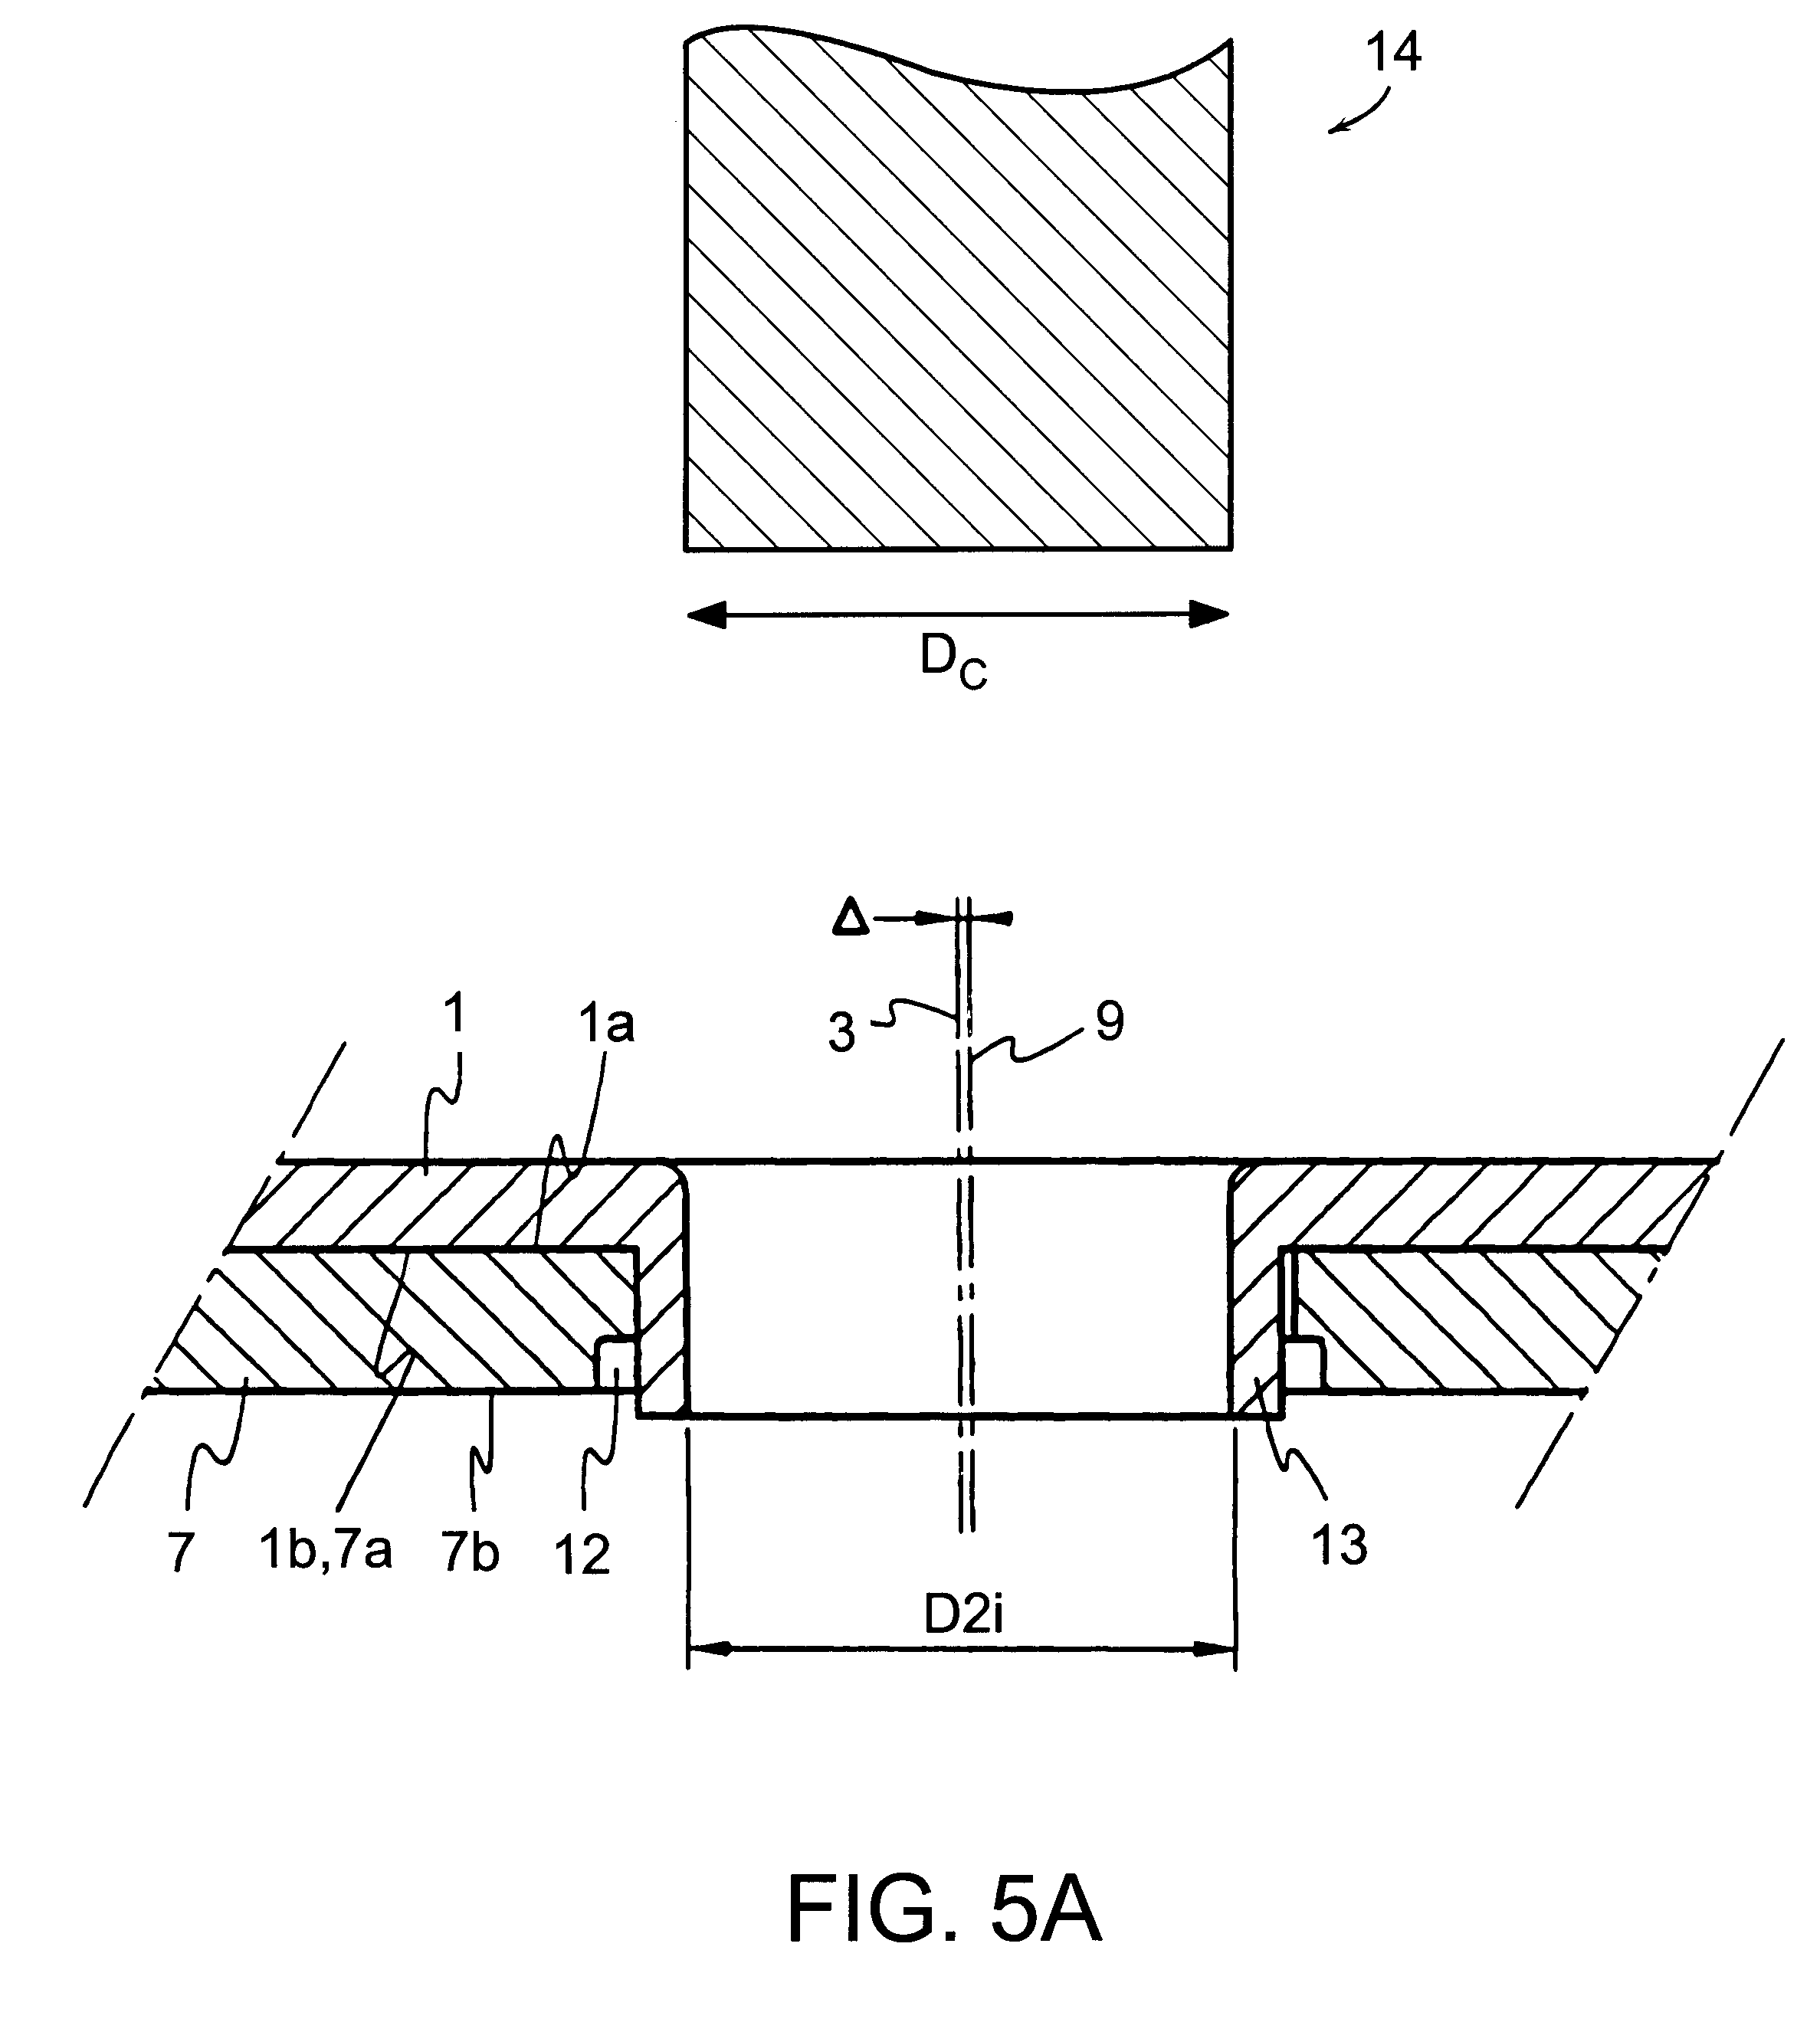 Method of the buttoning type for assembling sheets together without welding